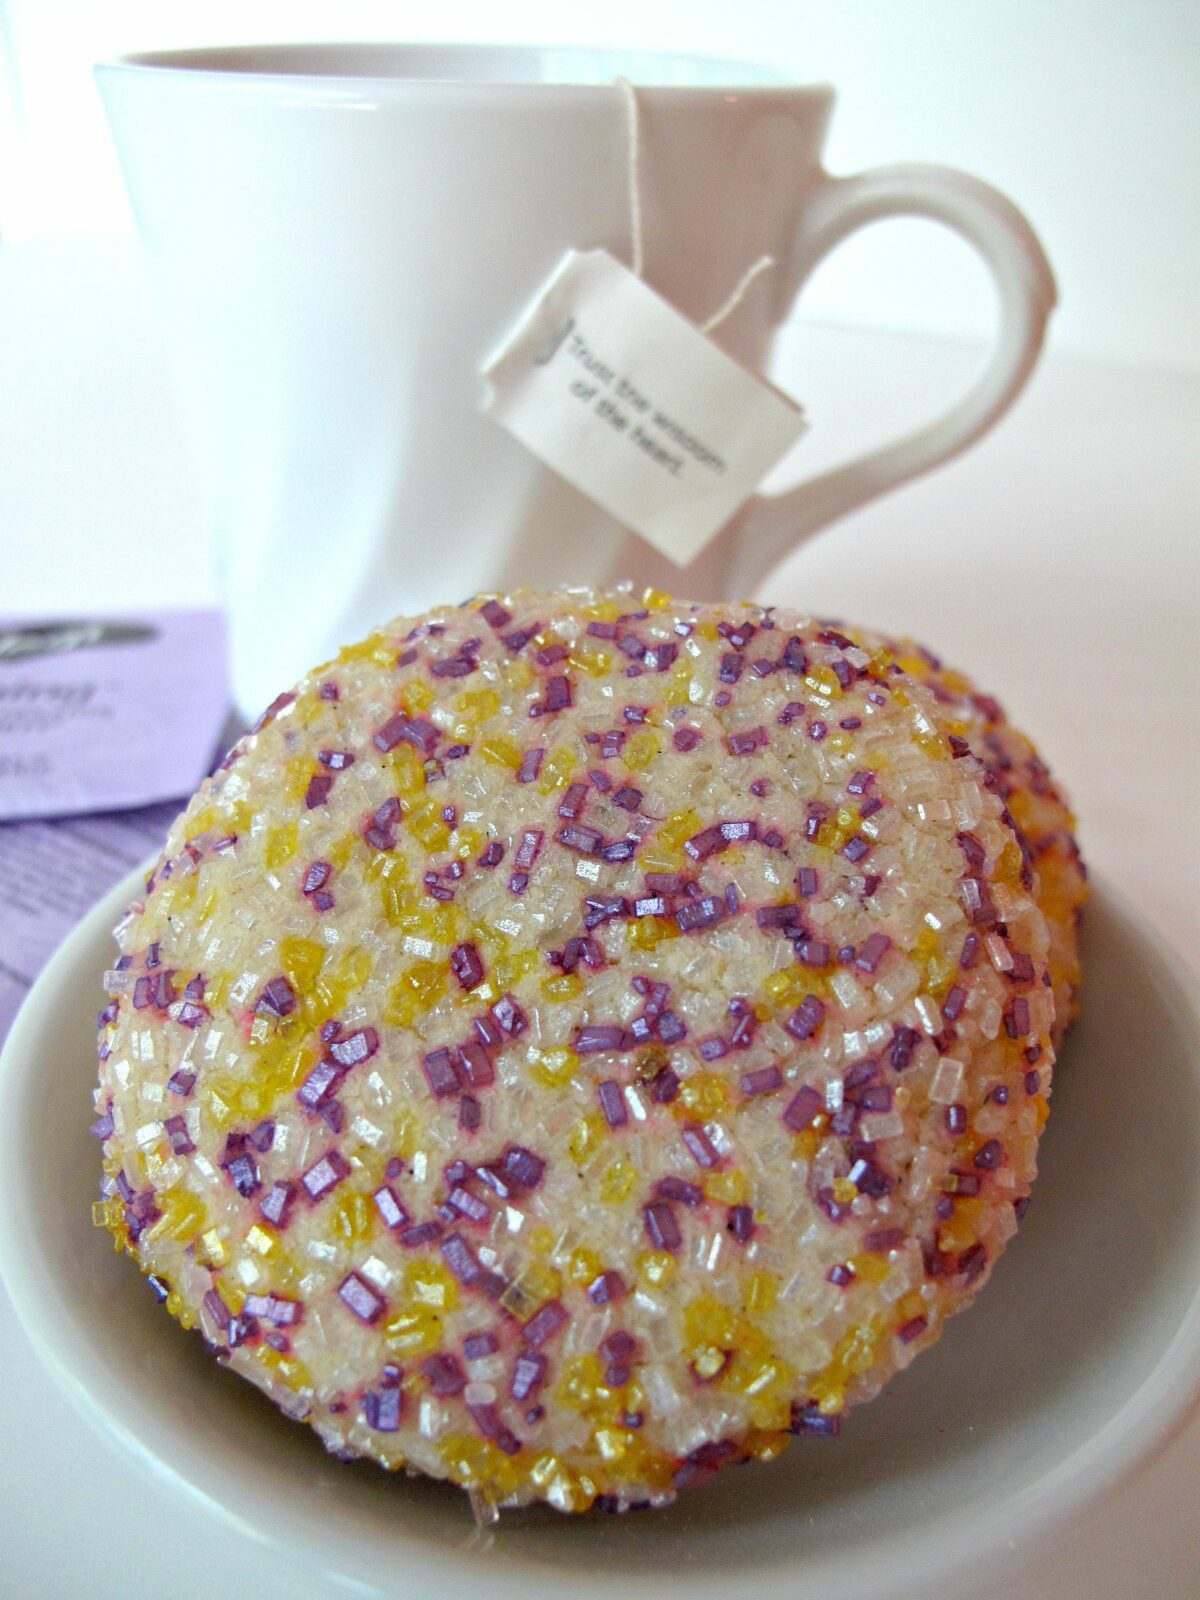 Closeup of a sugar coated cookie in front of a mug of tea.